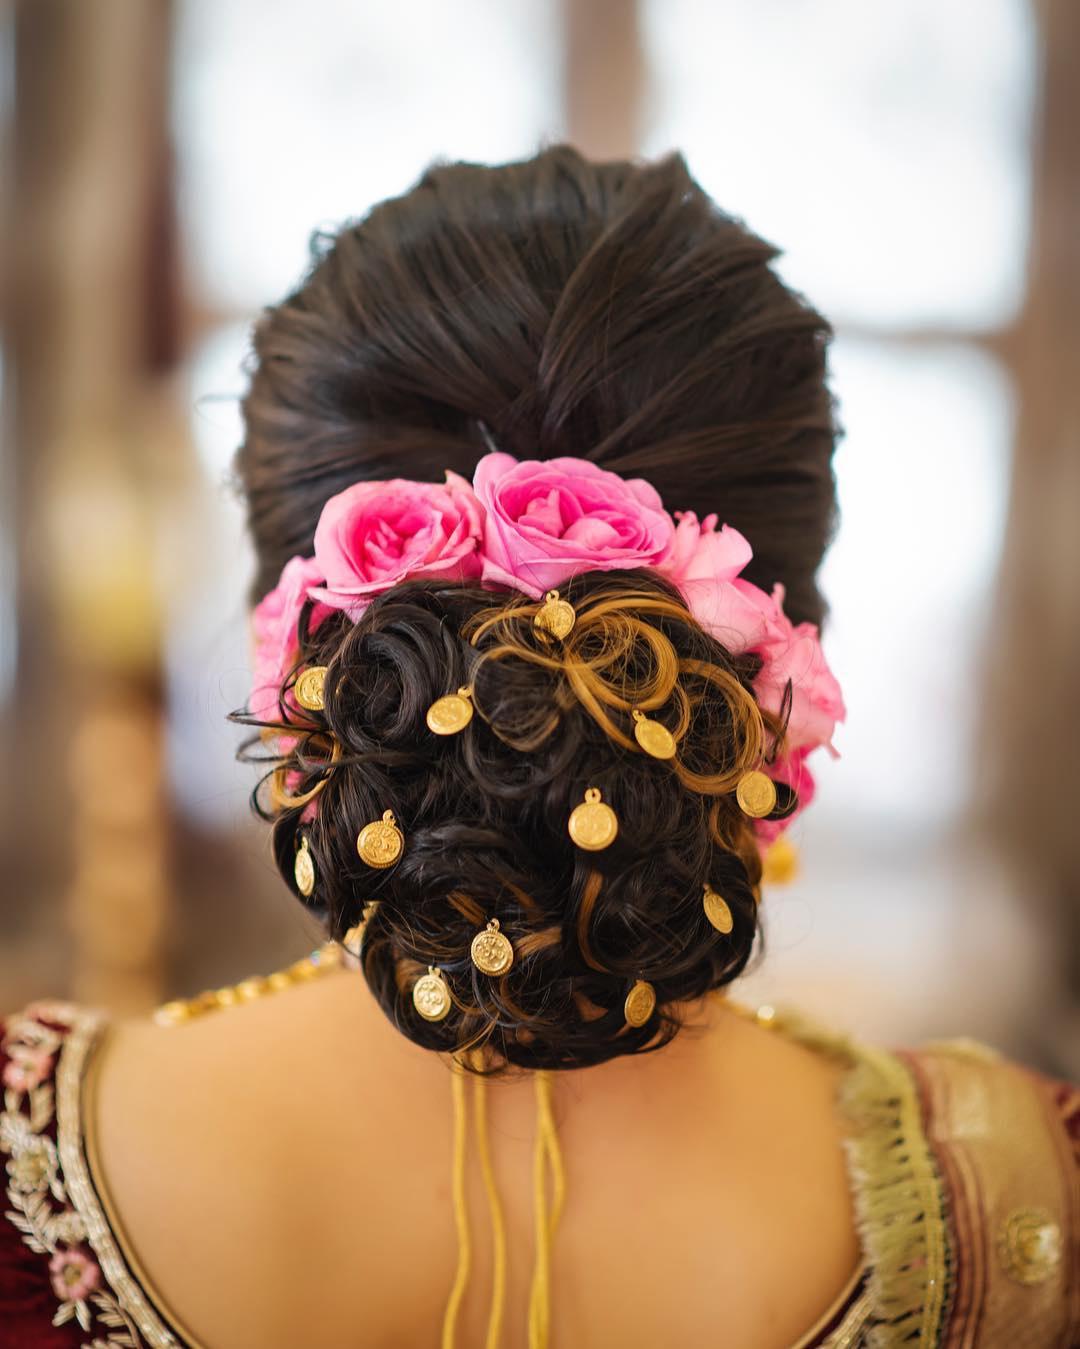 6 Amazing Mother Of The Bride Hairstyles To Make You Shine On Too!